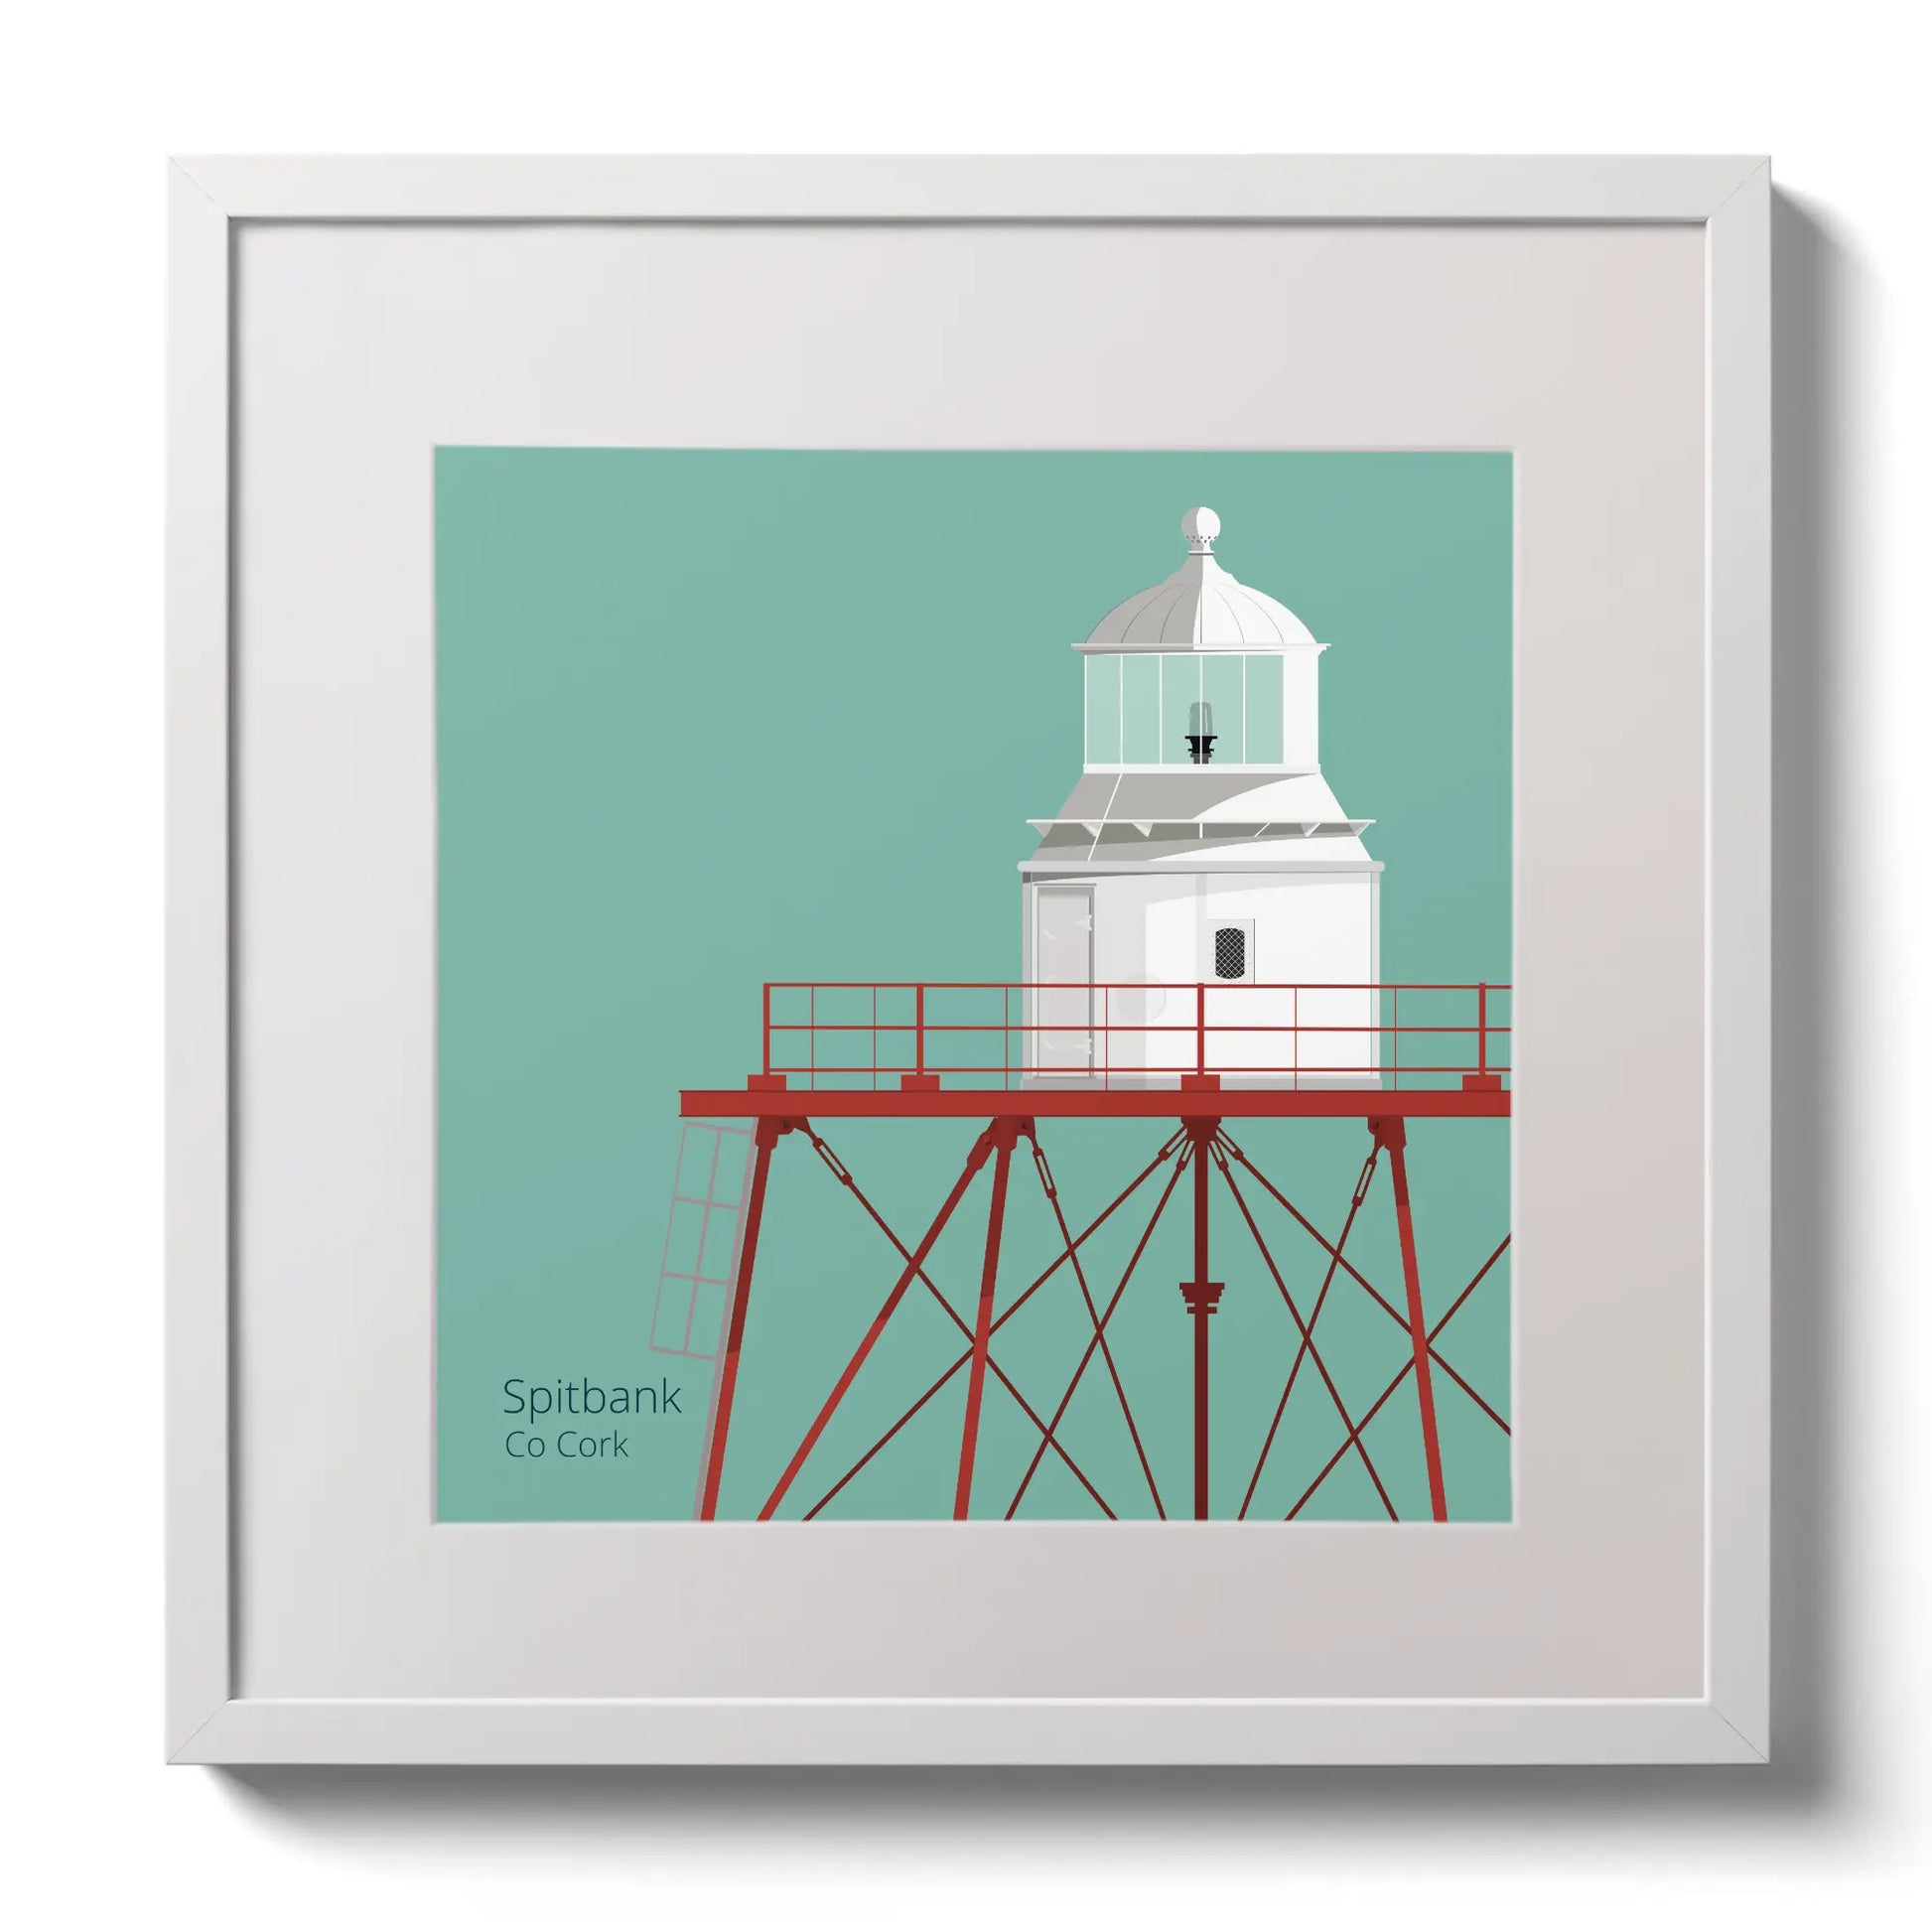 Illustration of Spitbank lighthouse on an ocean green background,  in a white square frame measuring 30x30cm.